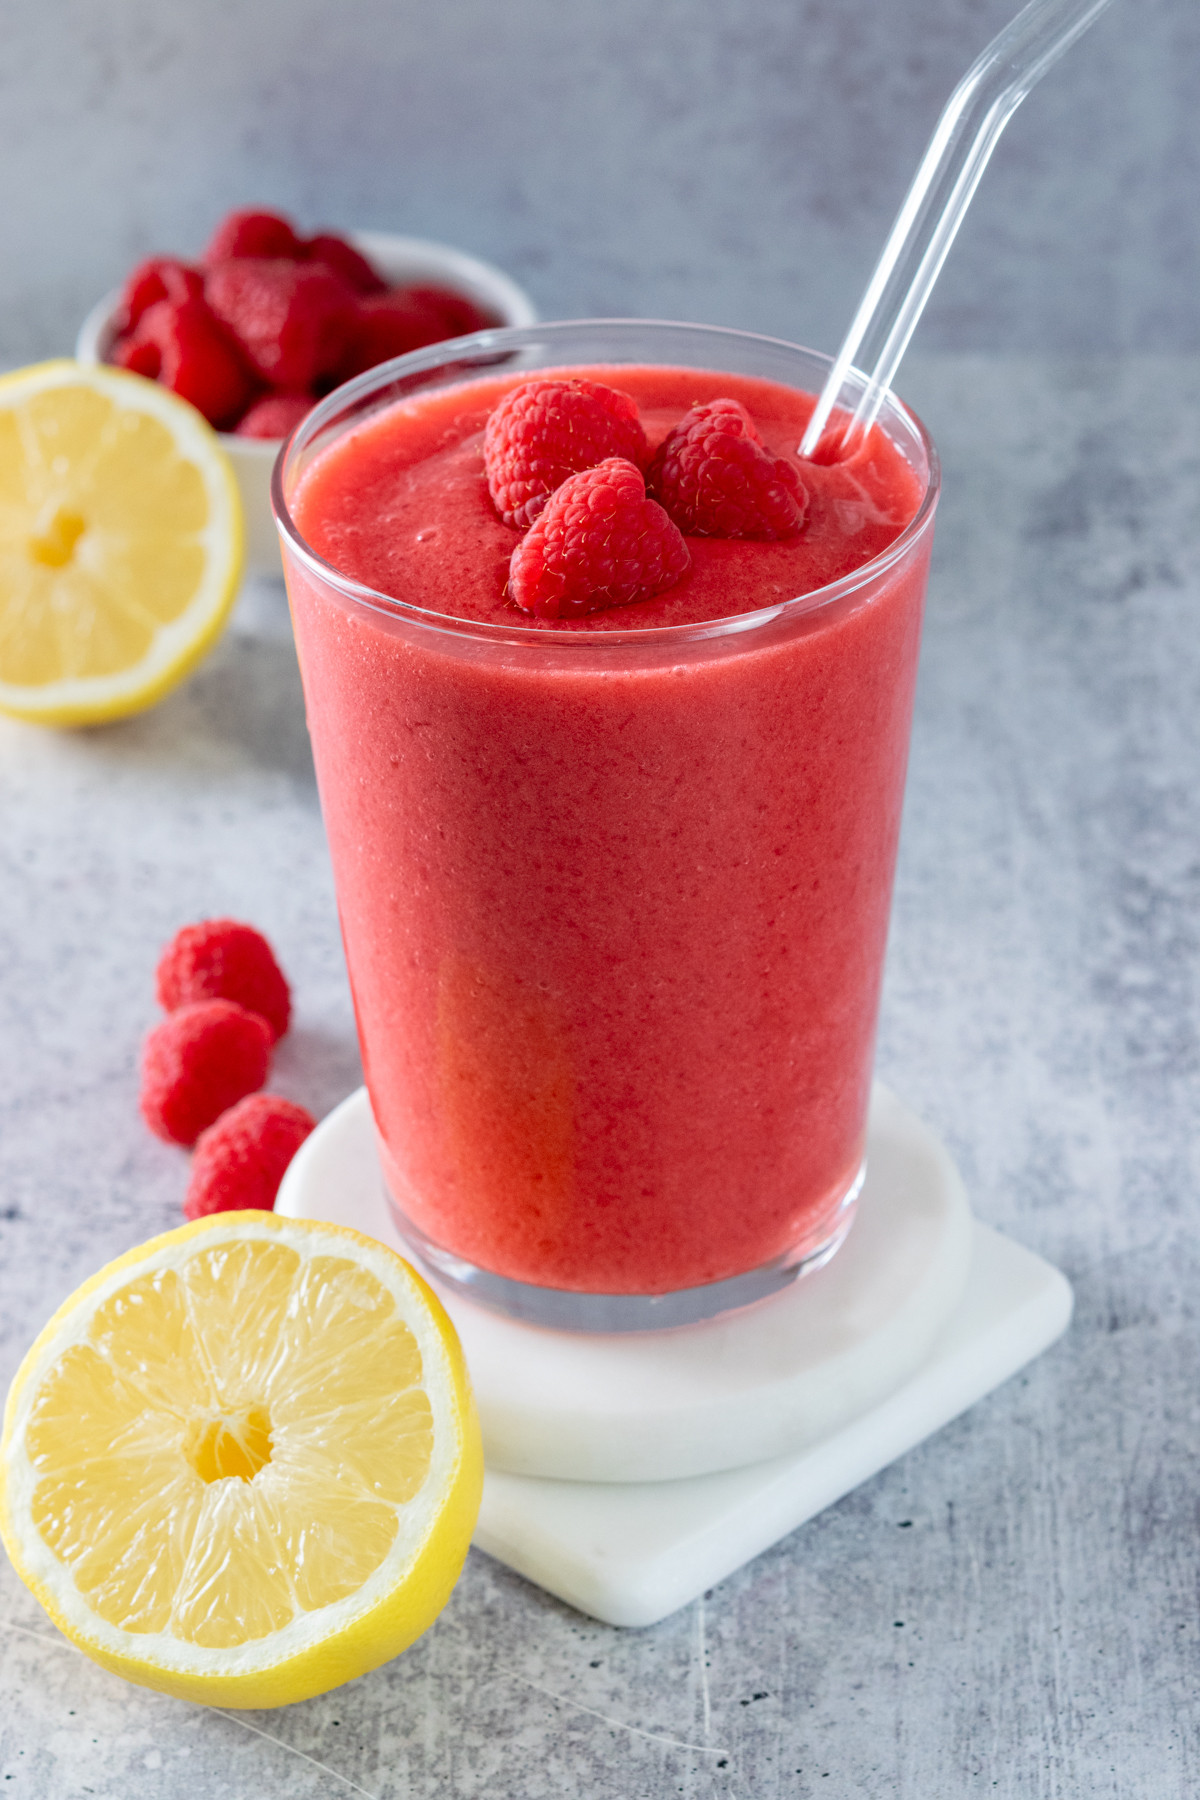 Frozen raspberry lemonade in a glass with straw with three raspberries on top. The drink is next to half a lemon and a few fresh raspberries.